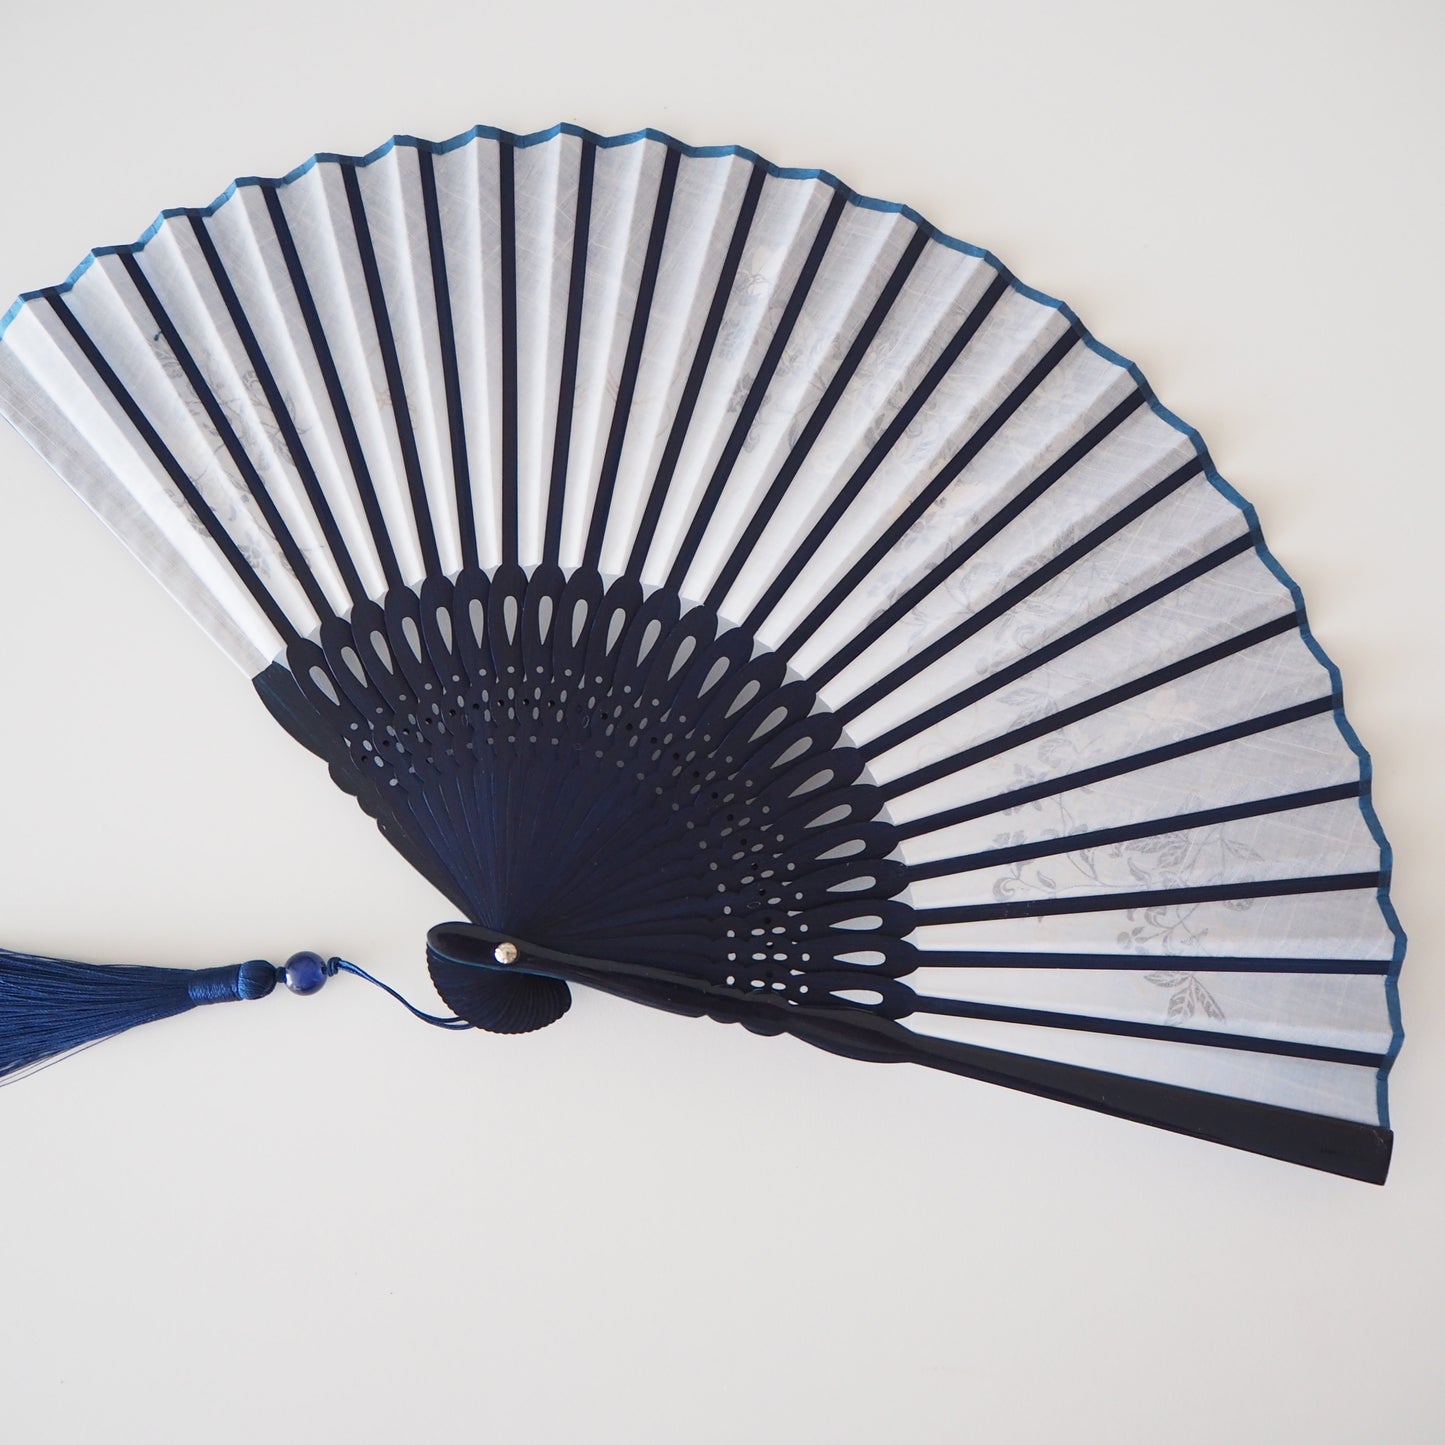 Folding Fan - Blue and White Floral Pattern